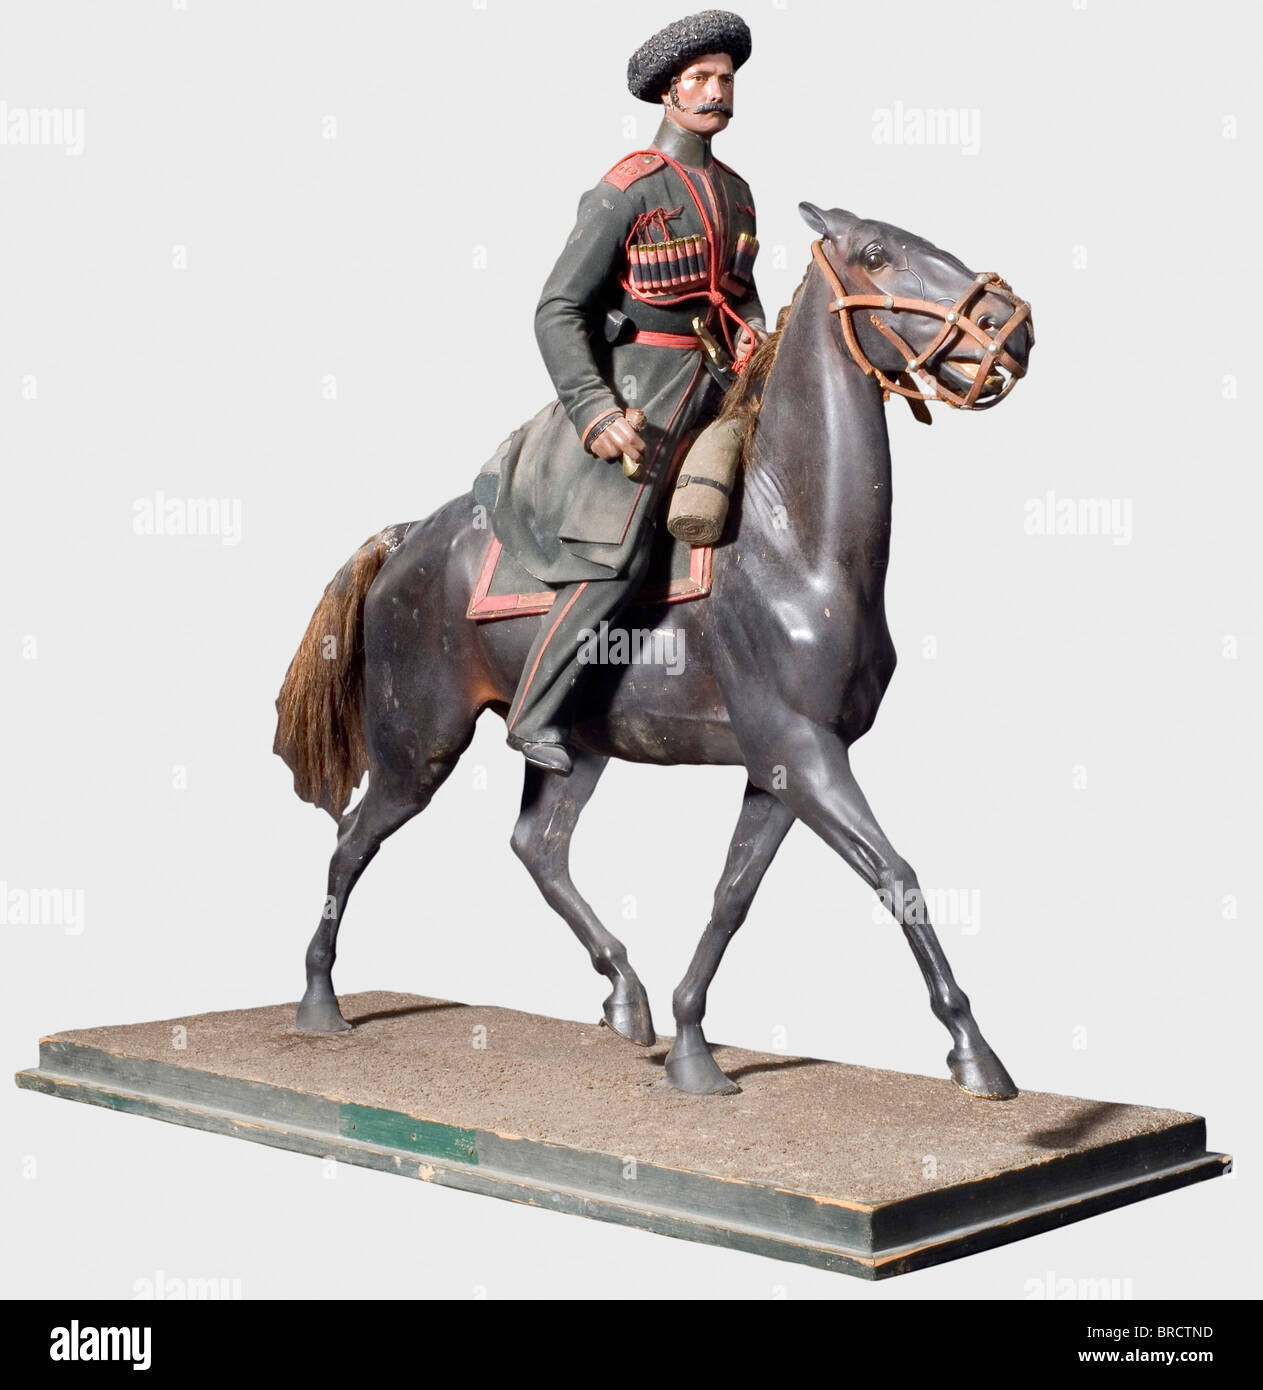 A model of a Cossack of the Caucasian Corps, Wilhelm Haasenberger, St. Petersburg, circa 1844 Plaster of Paris, hollow casting, coloured, leather, metals, horsehair and wood. Exceedingly detailed and natural presentation of a Cossack and his horse. Complete with saddlecloth, cartridge box, kinjal, pistol and mundir with gazyri on his chest. Blemishes on strapping and bridle, shashqa missing. Repaired due to old age. Height 69 cm. O historic, historical, people, 19th century, sculpture, sculptures, statuette, figurine, figurines, statuettes, fine arts, art, man,, Stock Photo